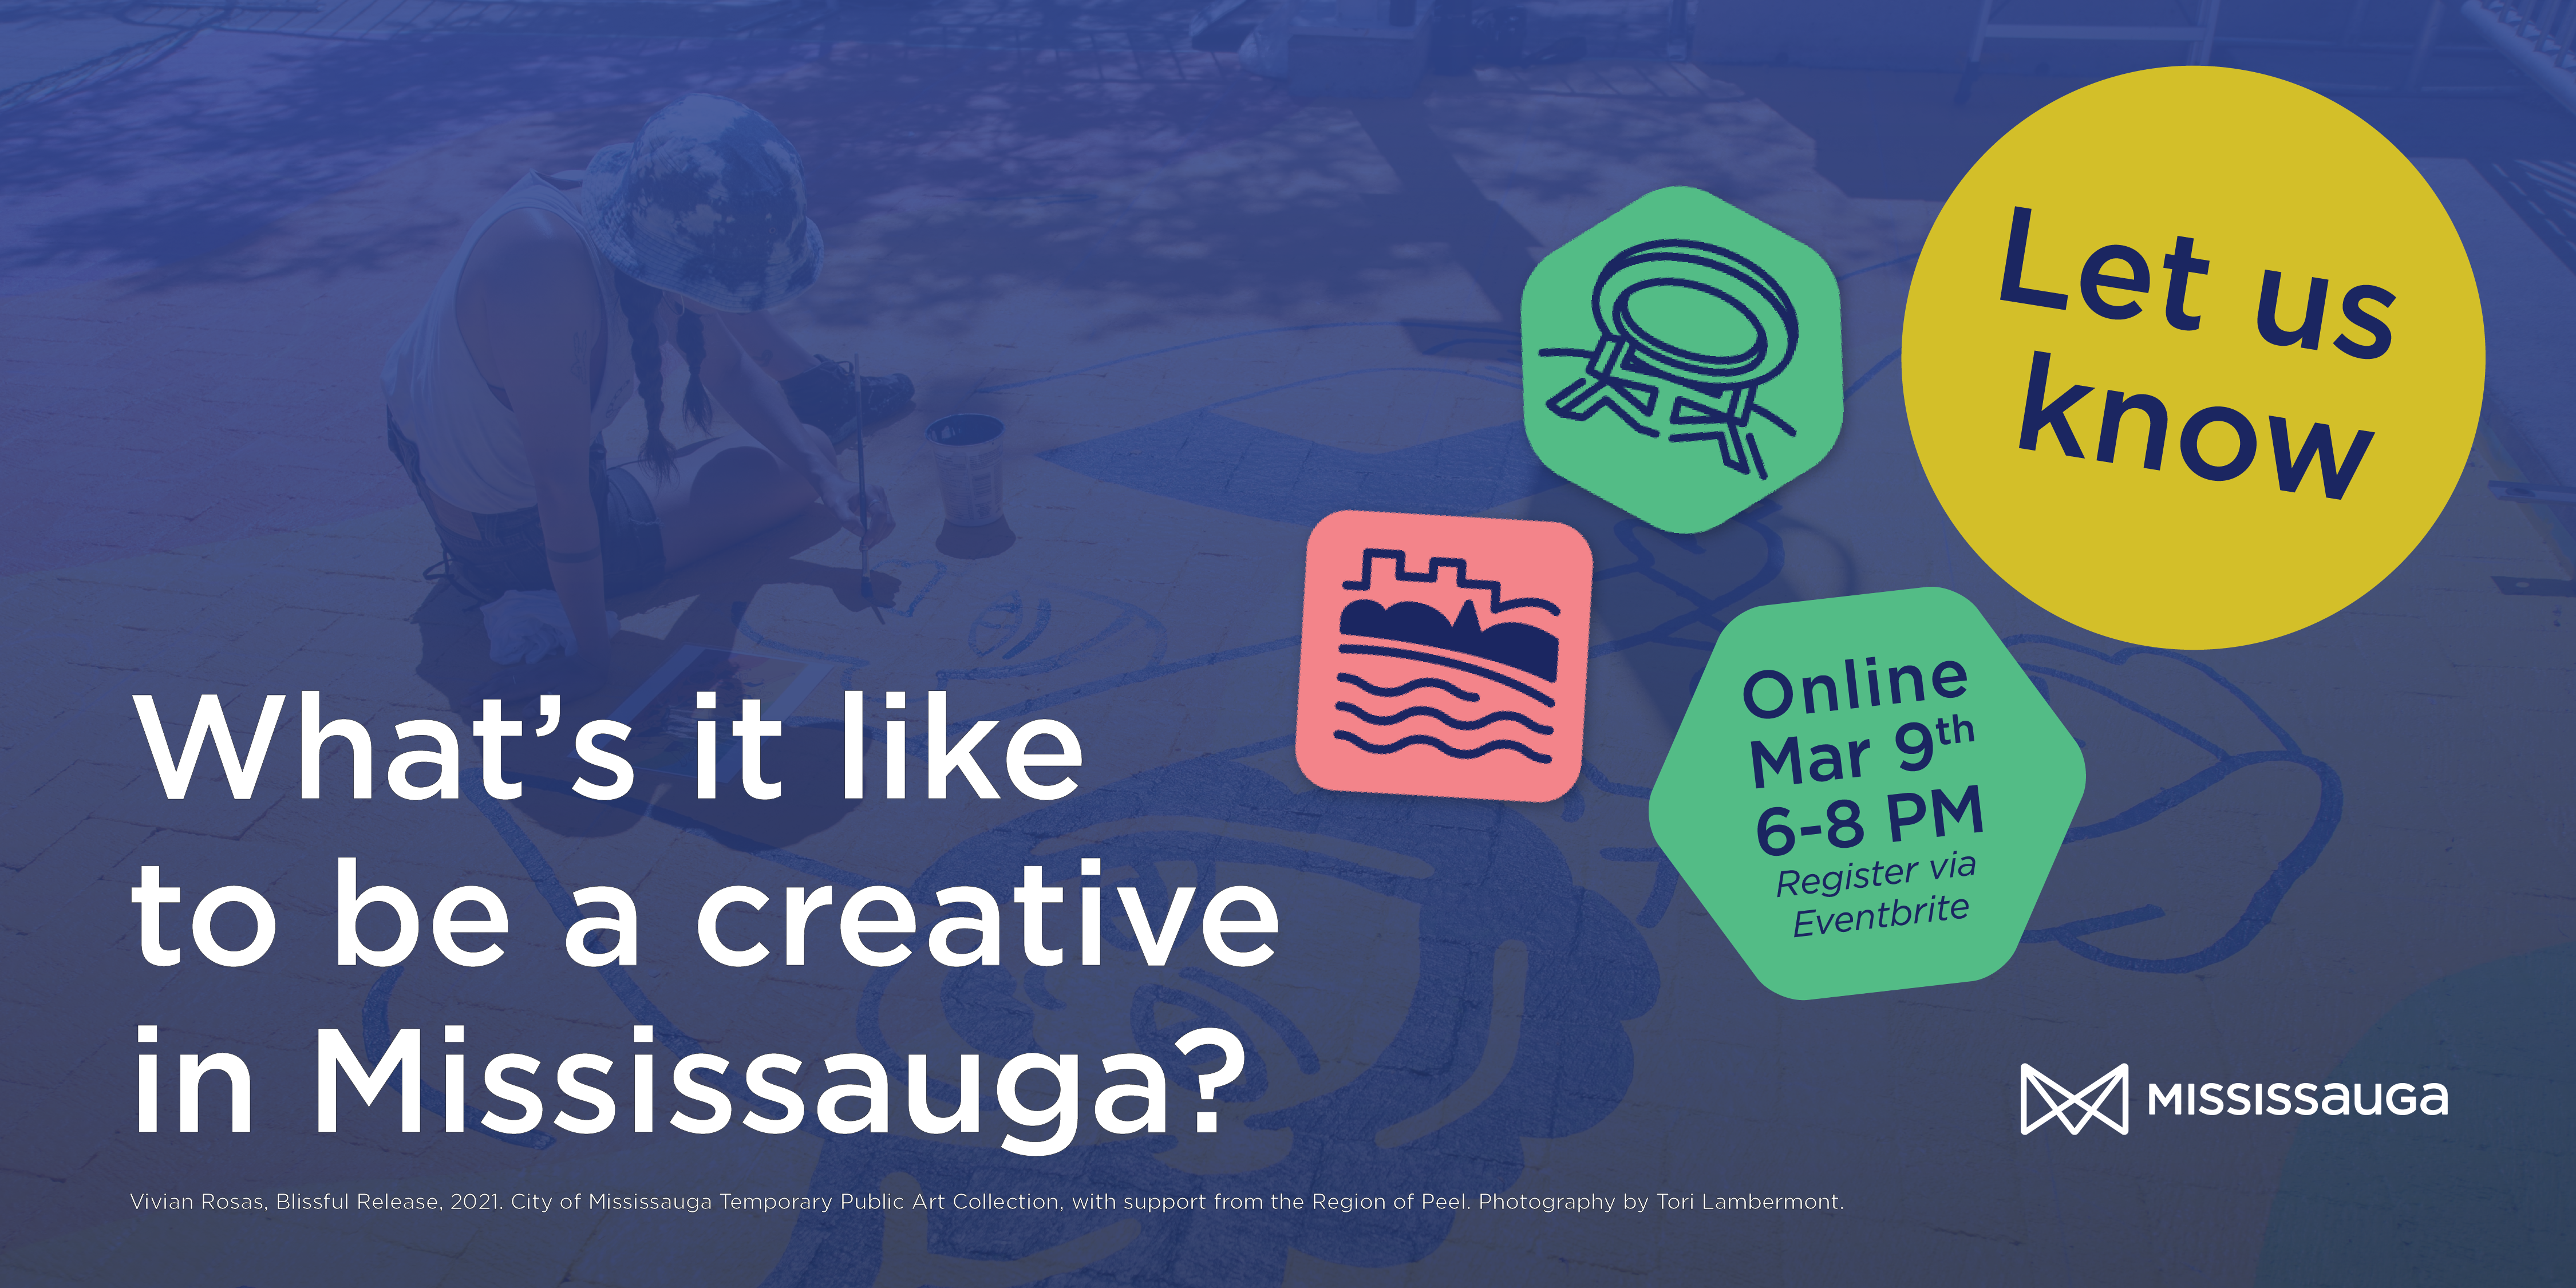 Join the City of Mississauga’s Culture Division and have your say as a creative!